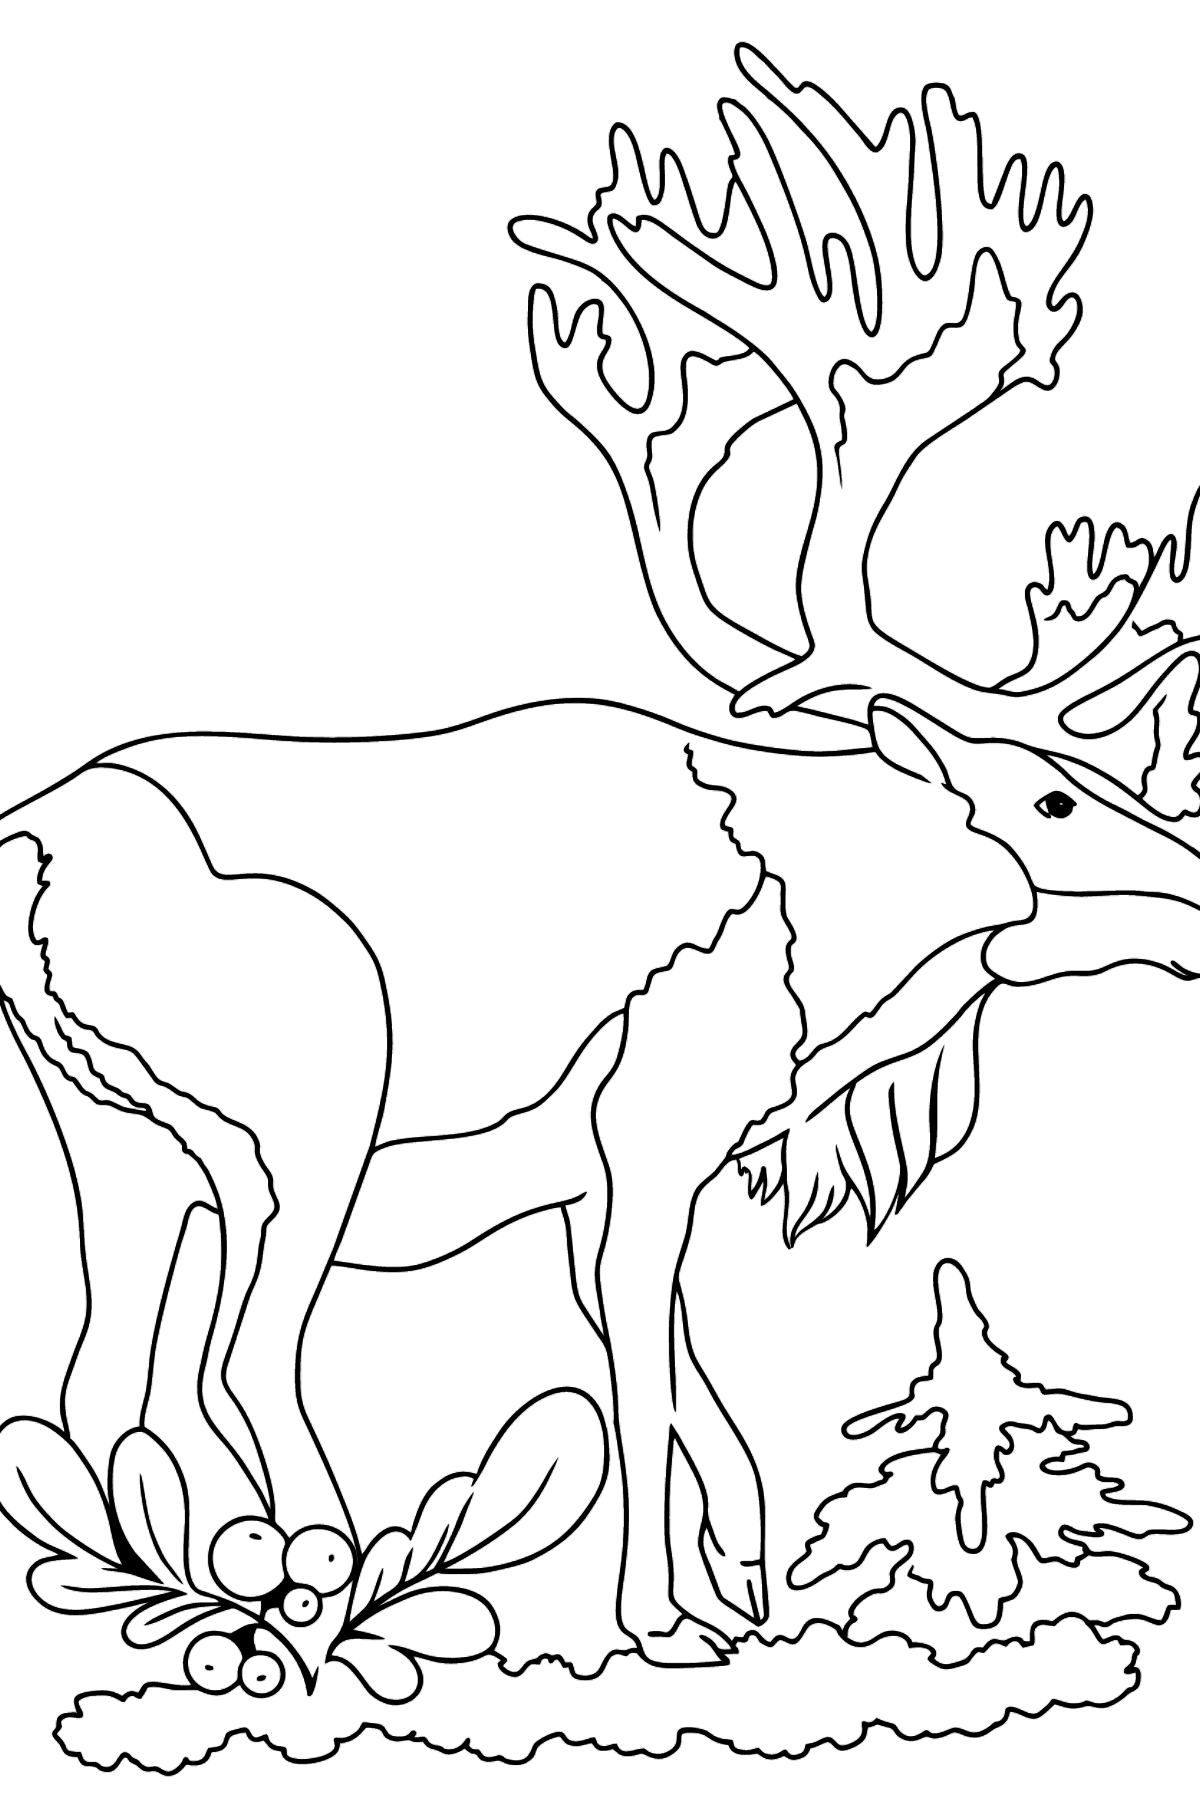 Coloring Page - a Deer with Gorgeous Antlers - Coloring Pages for Kids